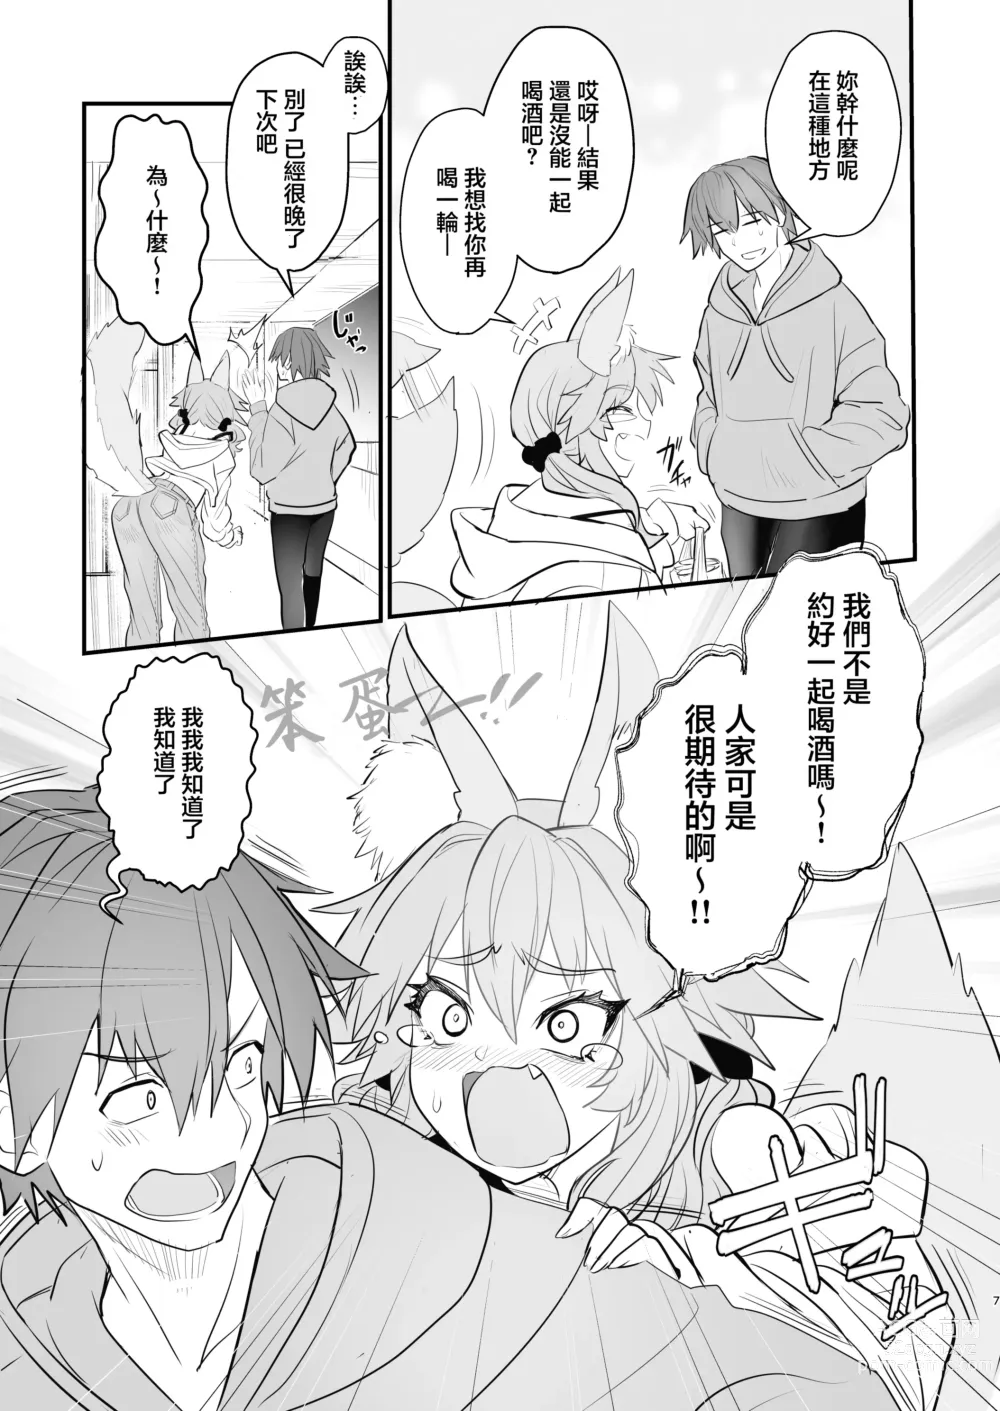 Page 6 of doujinshi 玉藻前大學物語